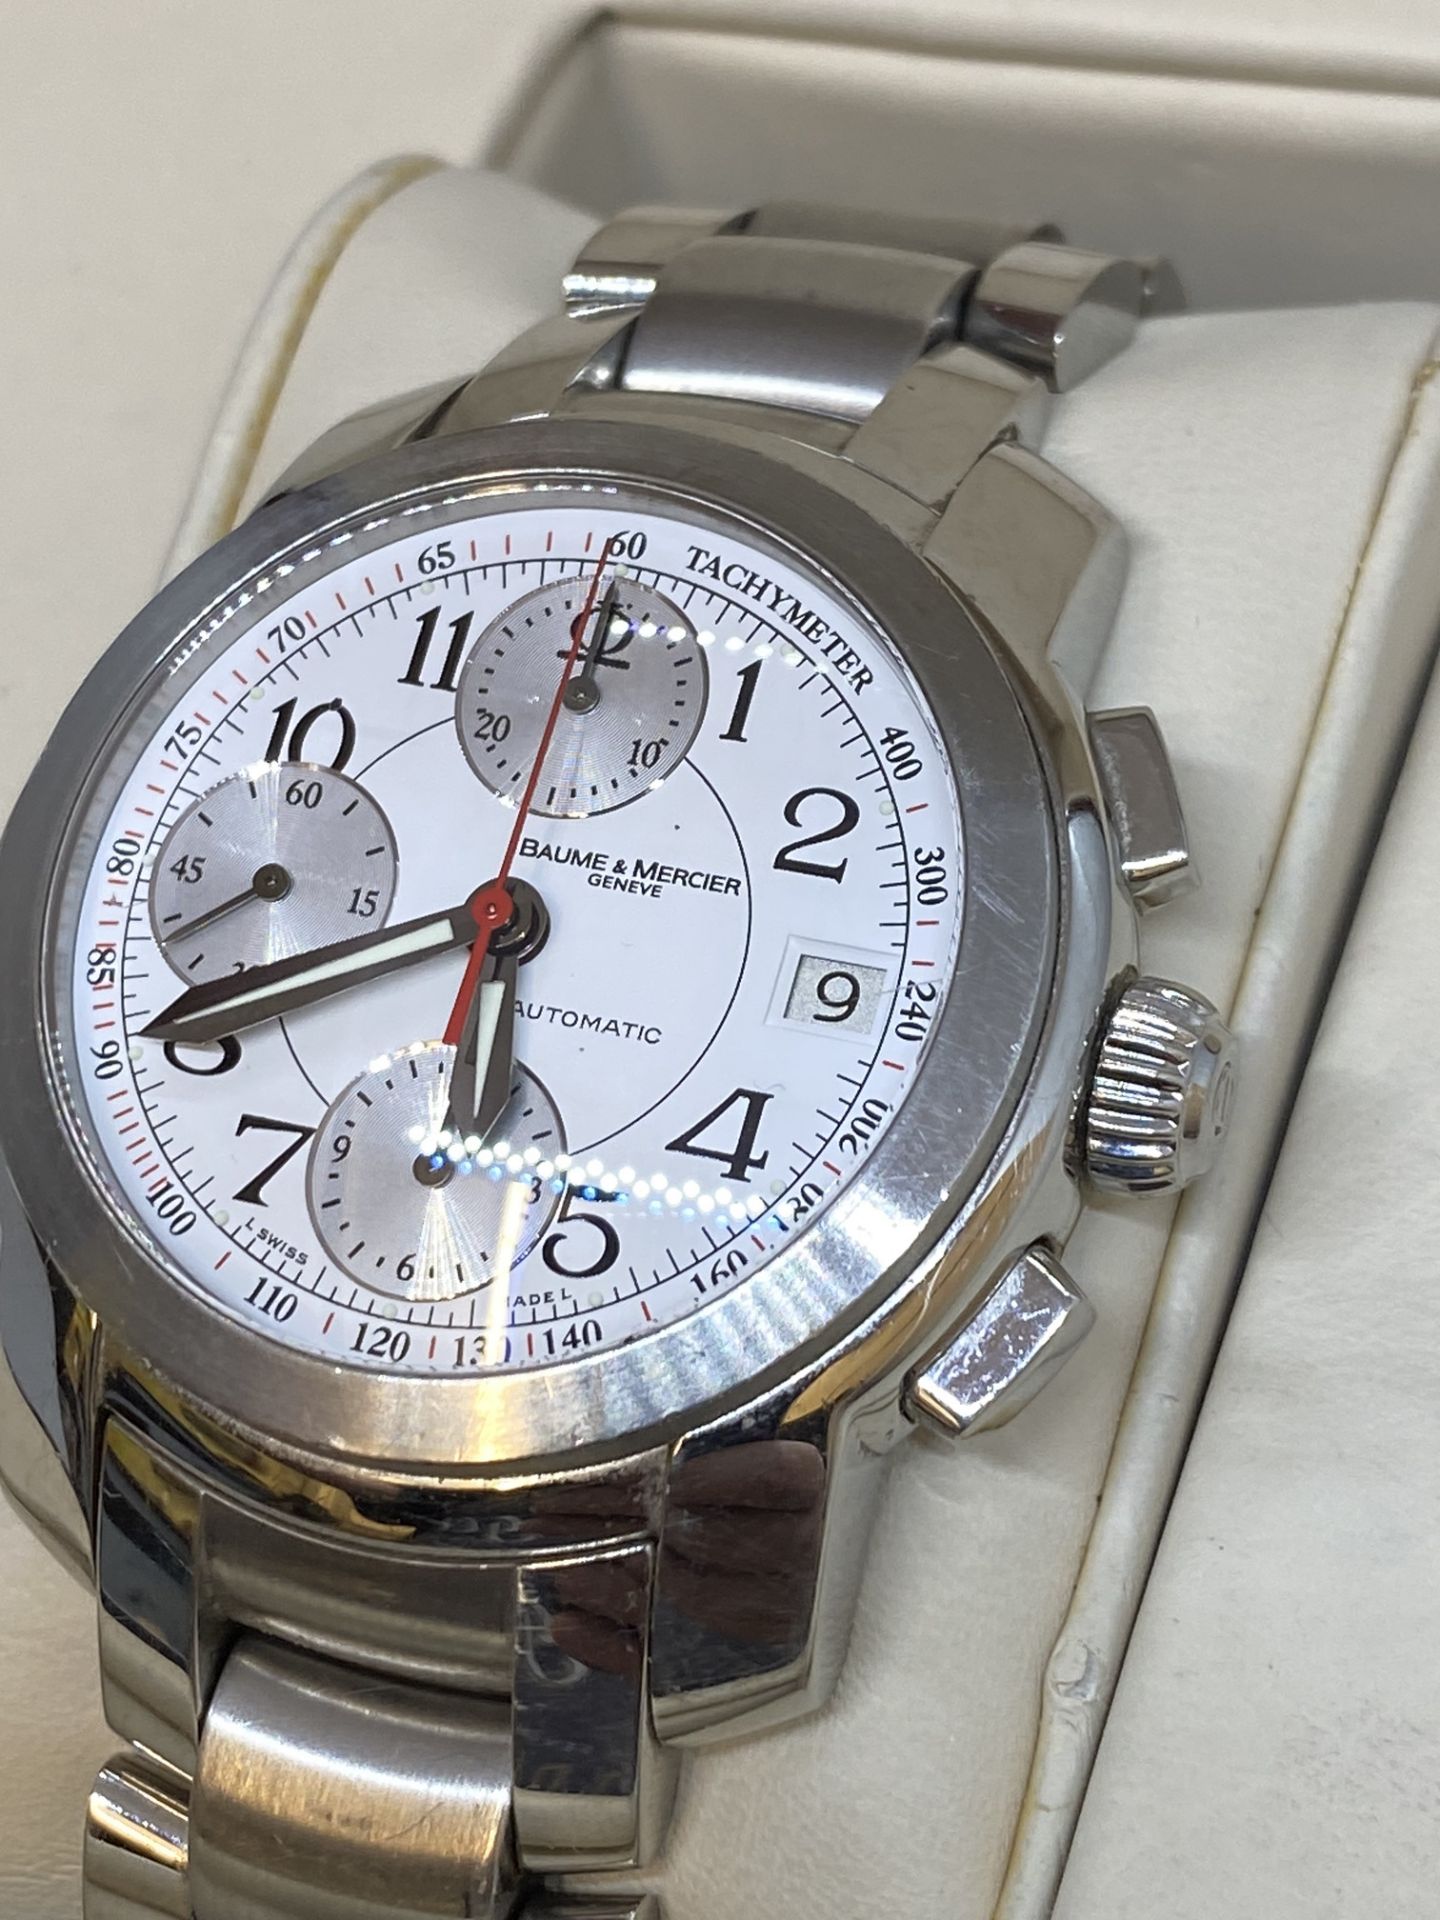 BAUME & MERCIER AUTOMATIC STAINLESS STEEL CHRONO WATCH - Image 5 of 8